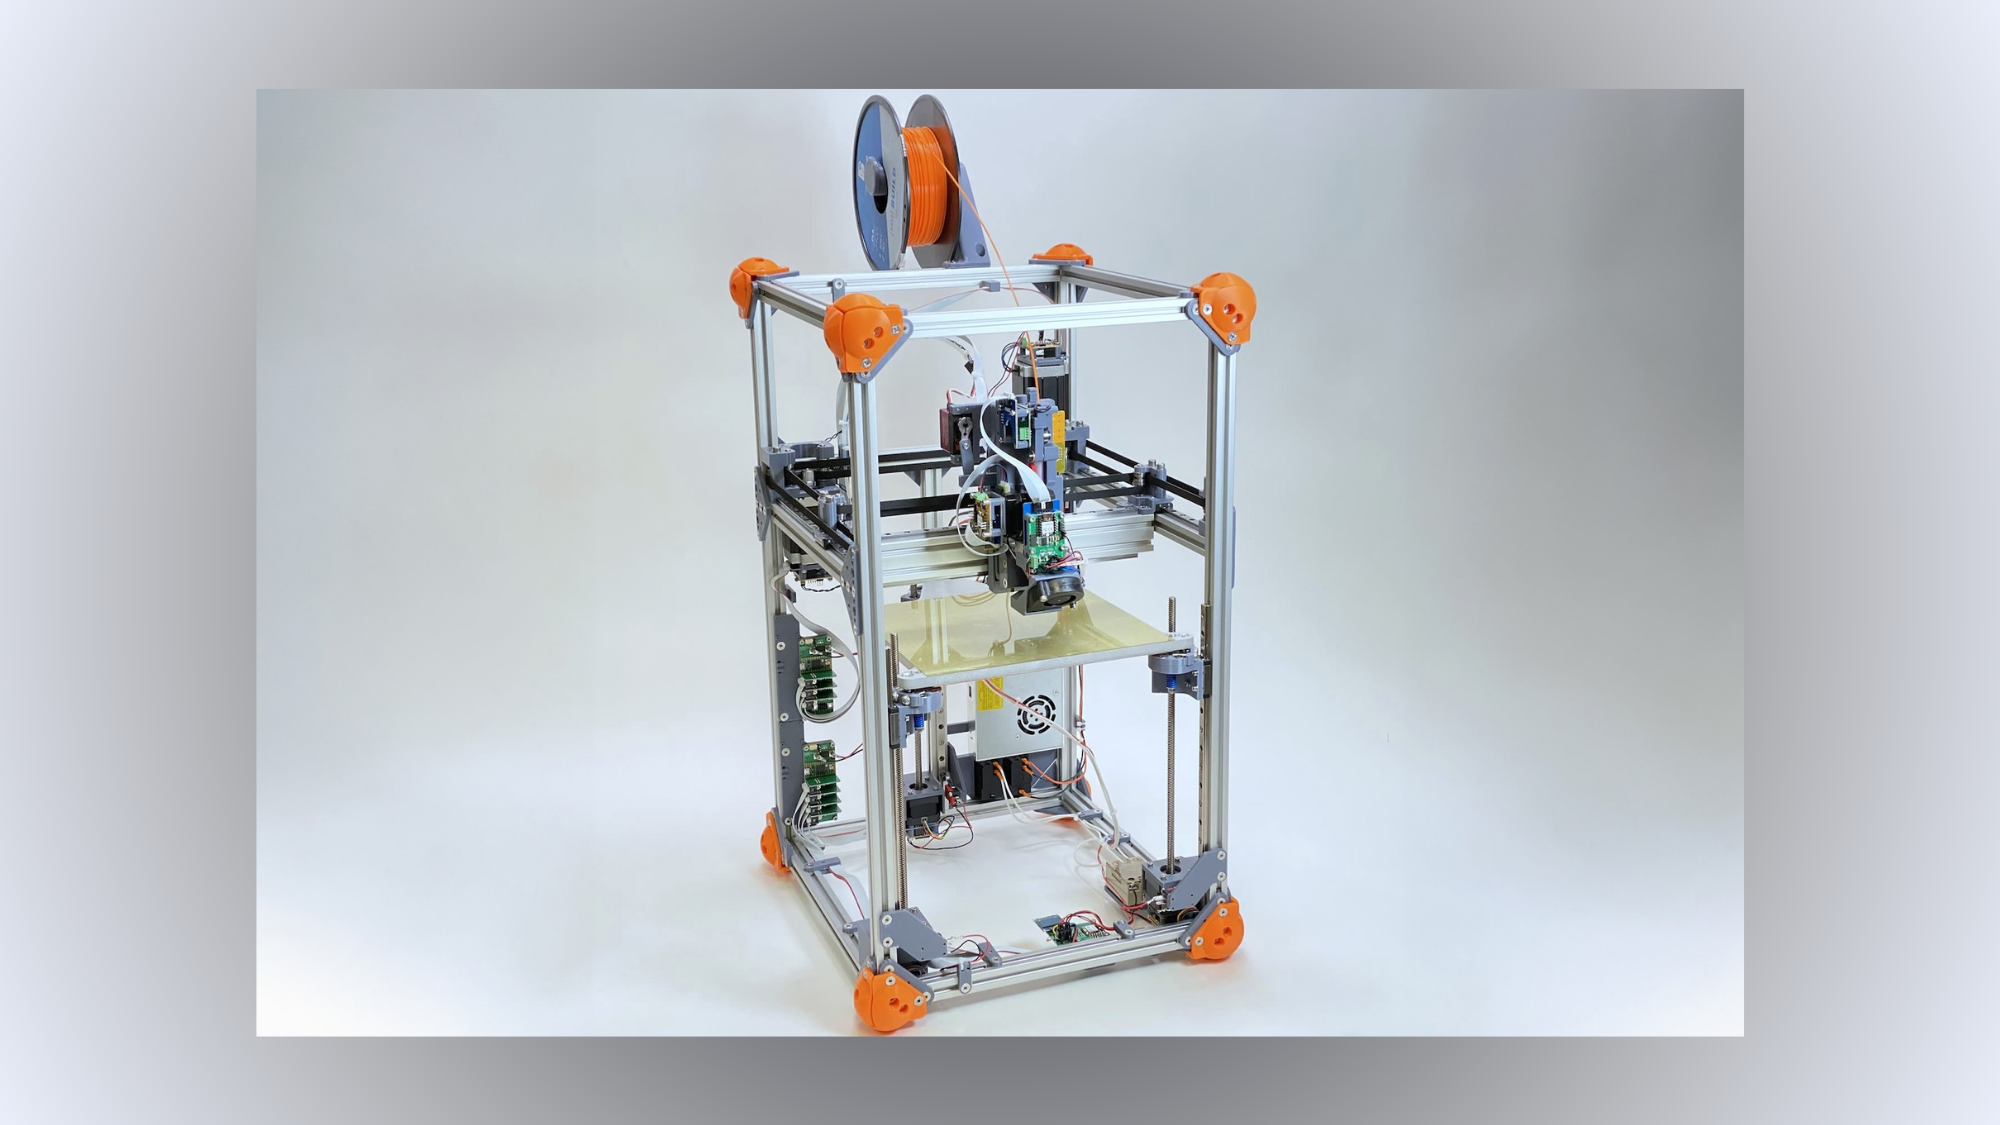 Researchers developed a 3D printer that can automatically identify the parameters of an unknown material on its own. The advance could help make 3D printing more sustainable, enabling printing with renewable or recyclable materials that are difficult to characterize.